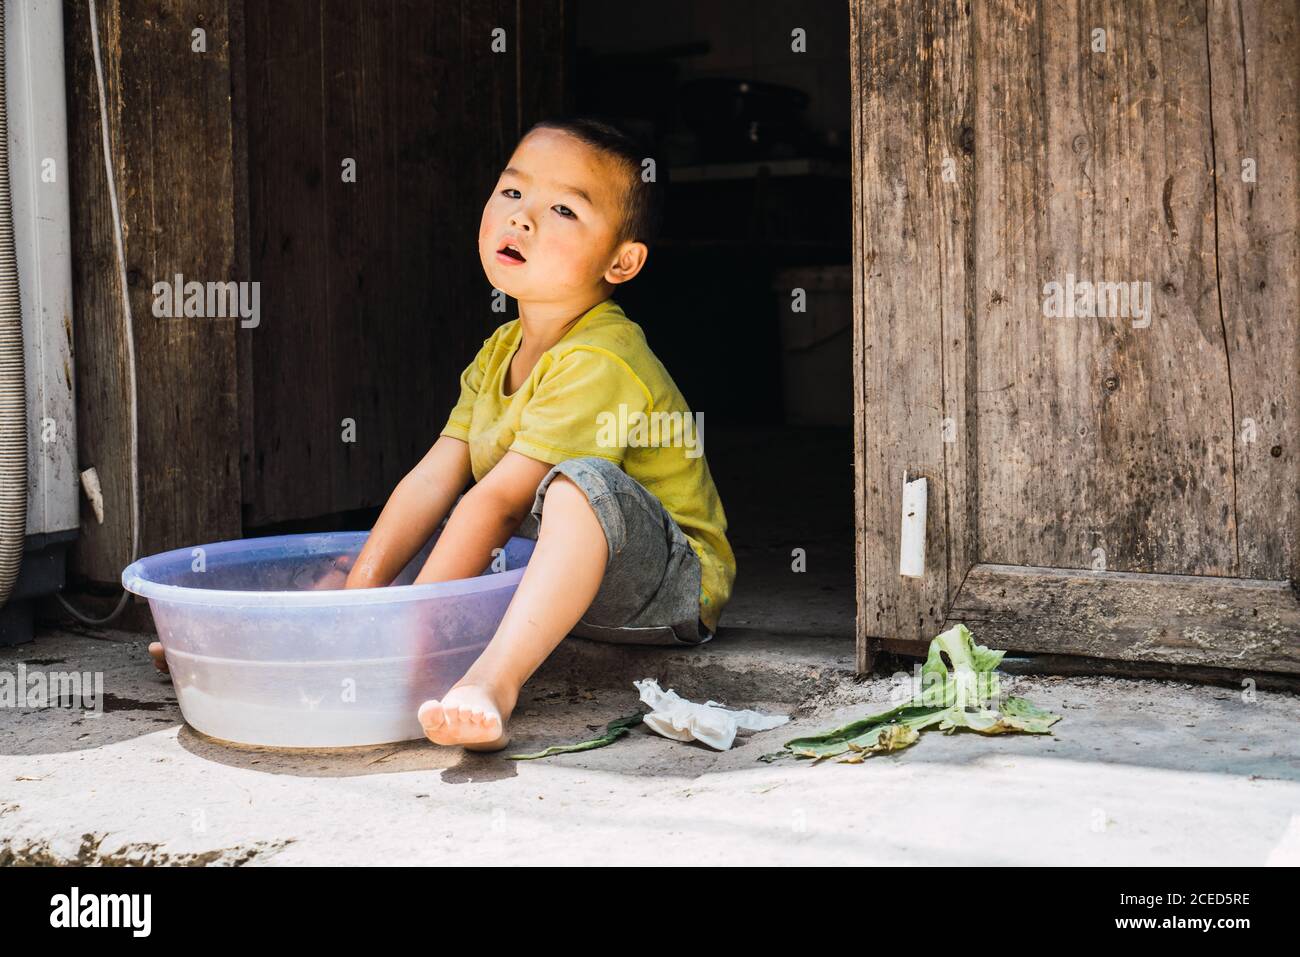 GUINZHOU, CHINA - JUNE 14, 2018: Adorable little child of Miao ethnic minority in summer clothes sitting on stone floor with hands in plastic basin with water and looking away in Guizhou province of China Stock Photo